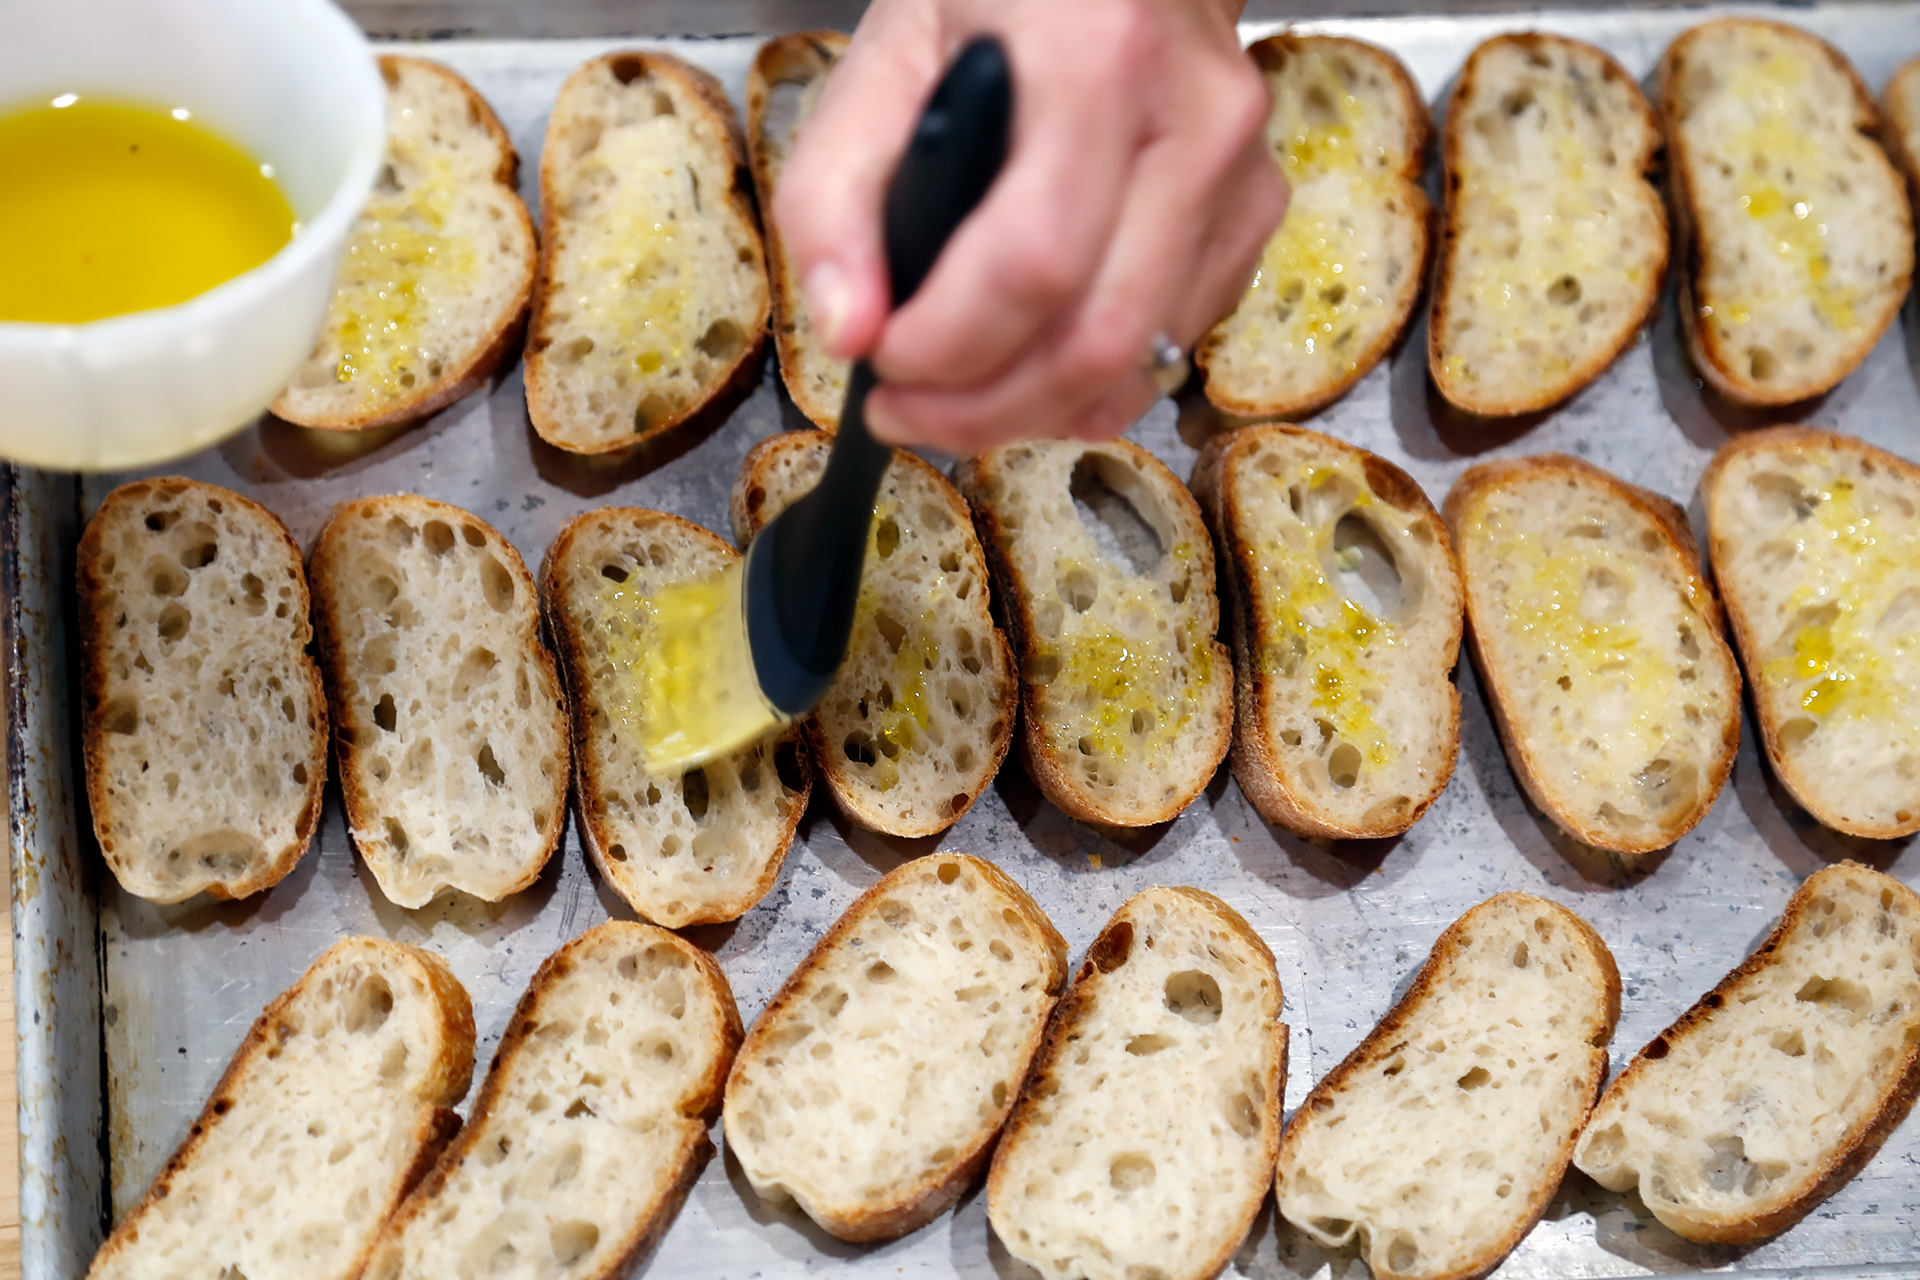 Brush the baguette slices with the olive oil, place the bread in a single layer on a baking sheet.